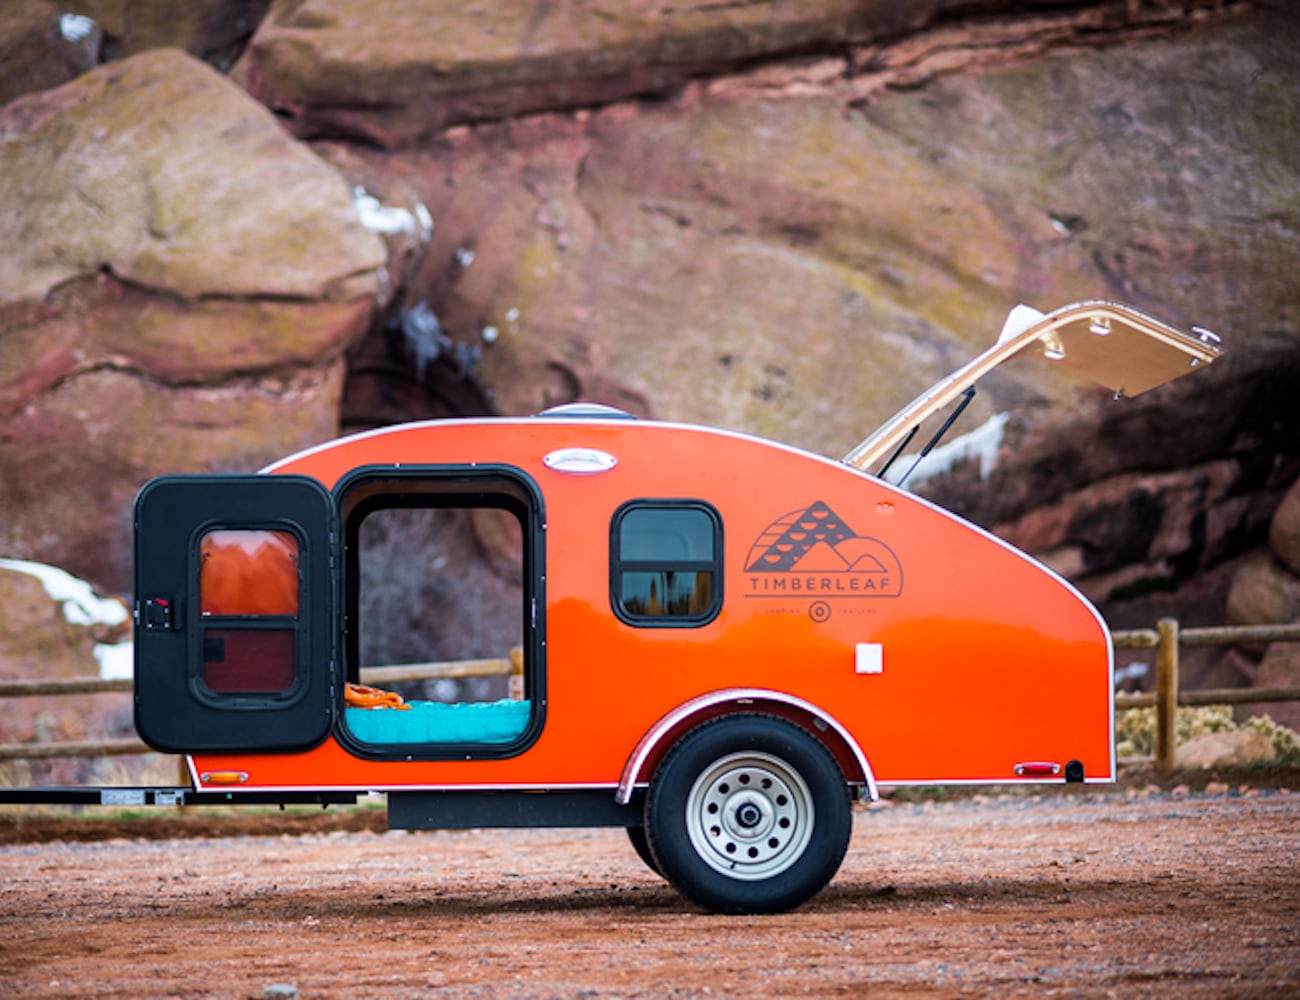 Timberleaf Teardrop Trailers let you camp off the beaten path